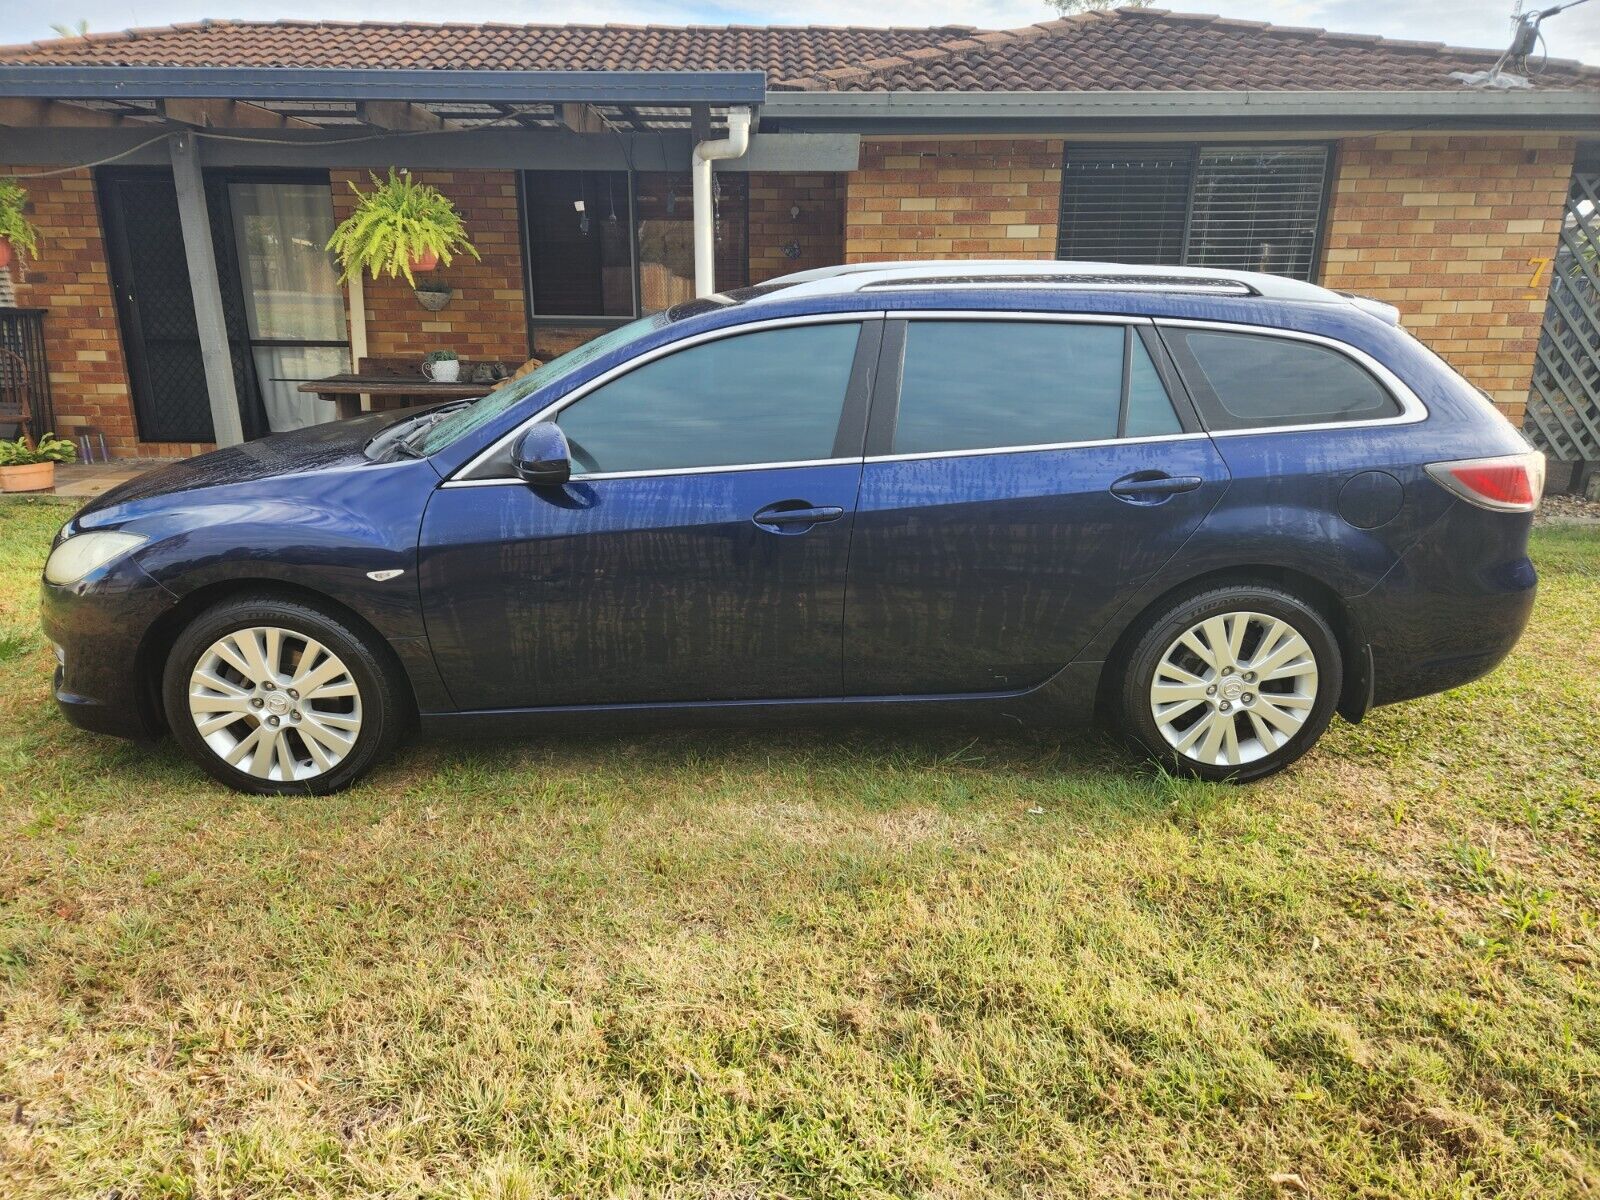 Selling 2009 Mazda 6 wagon still in great condition